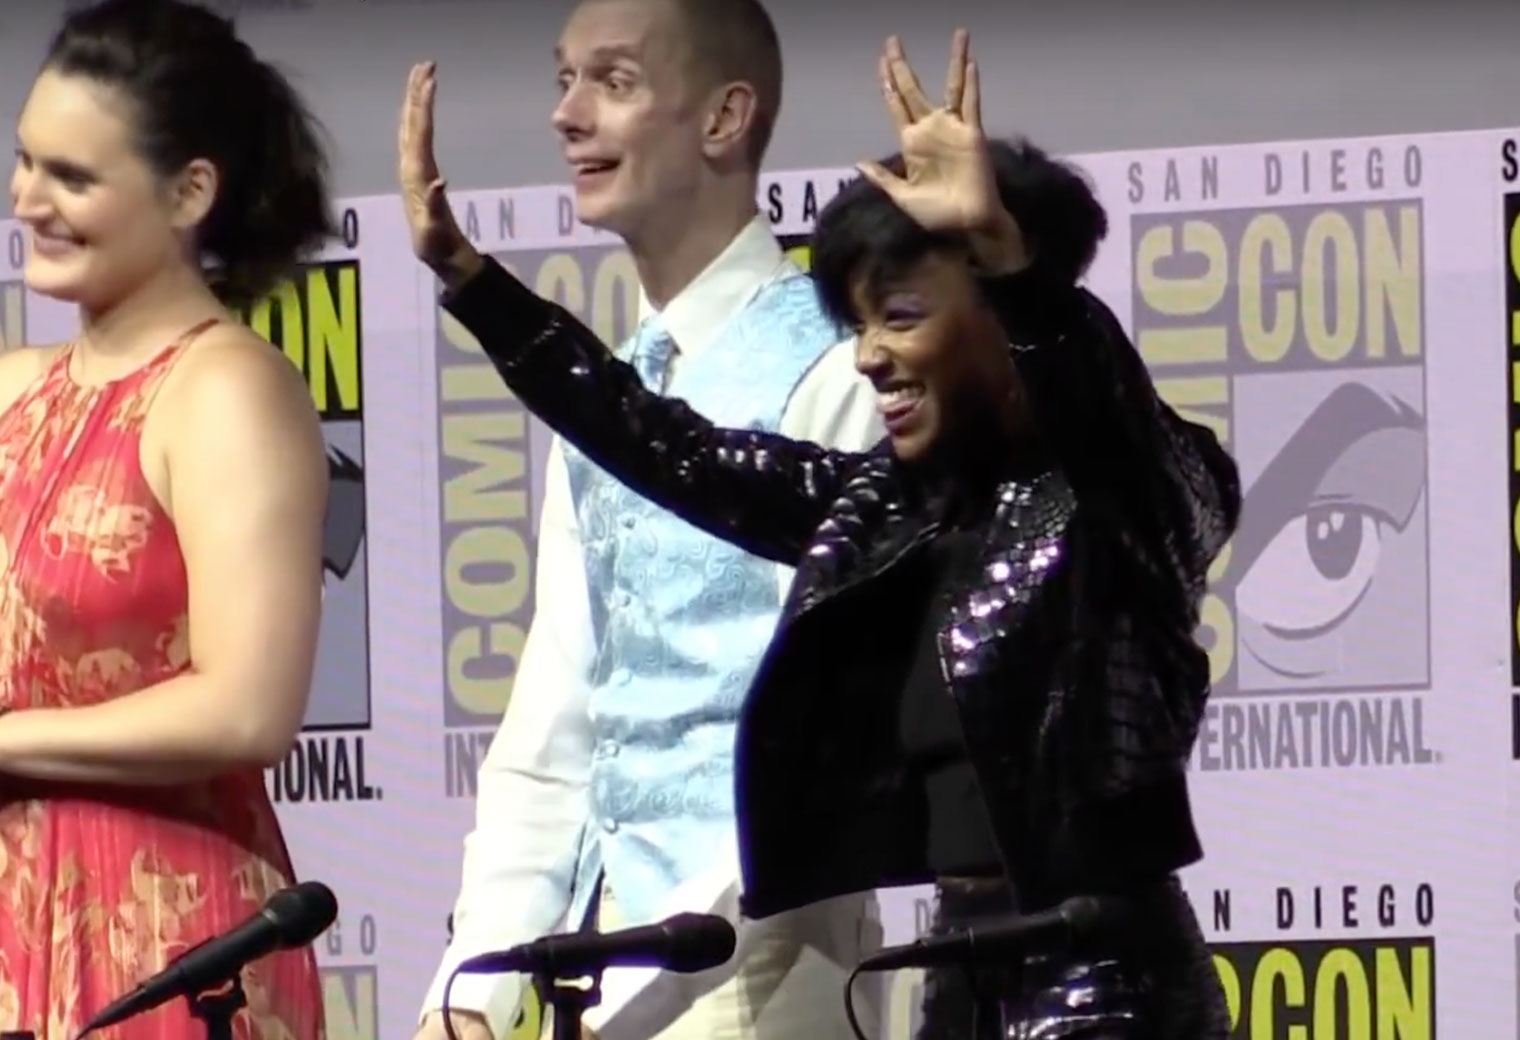 WATCH: Full STAR TREK: DISCOVERY Panel From SDCC